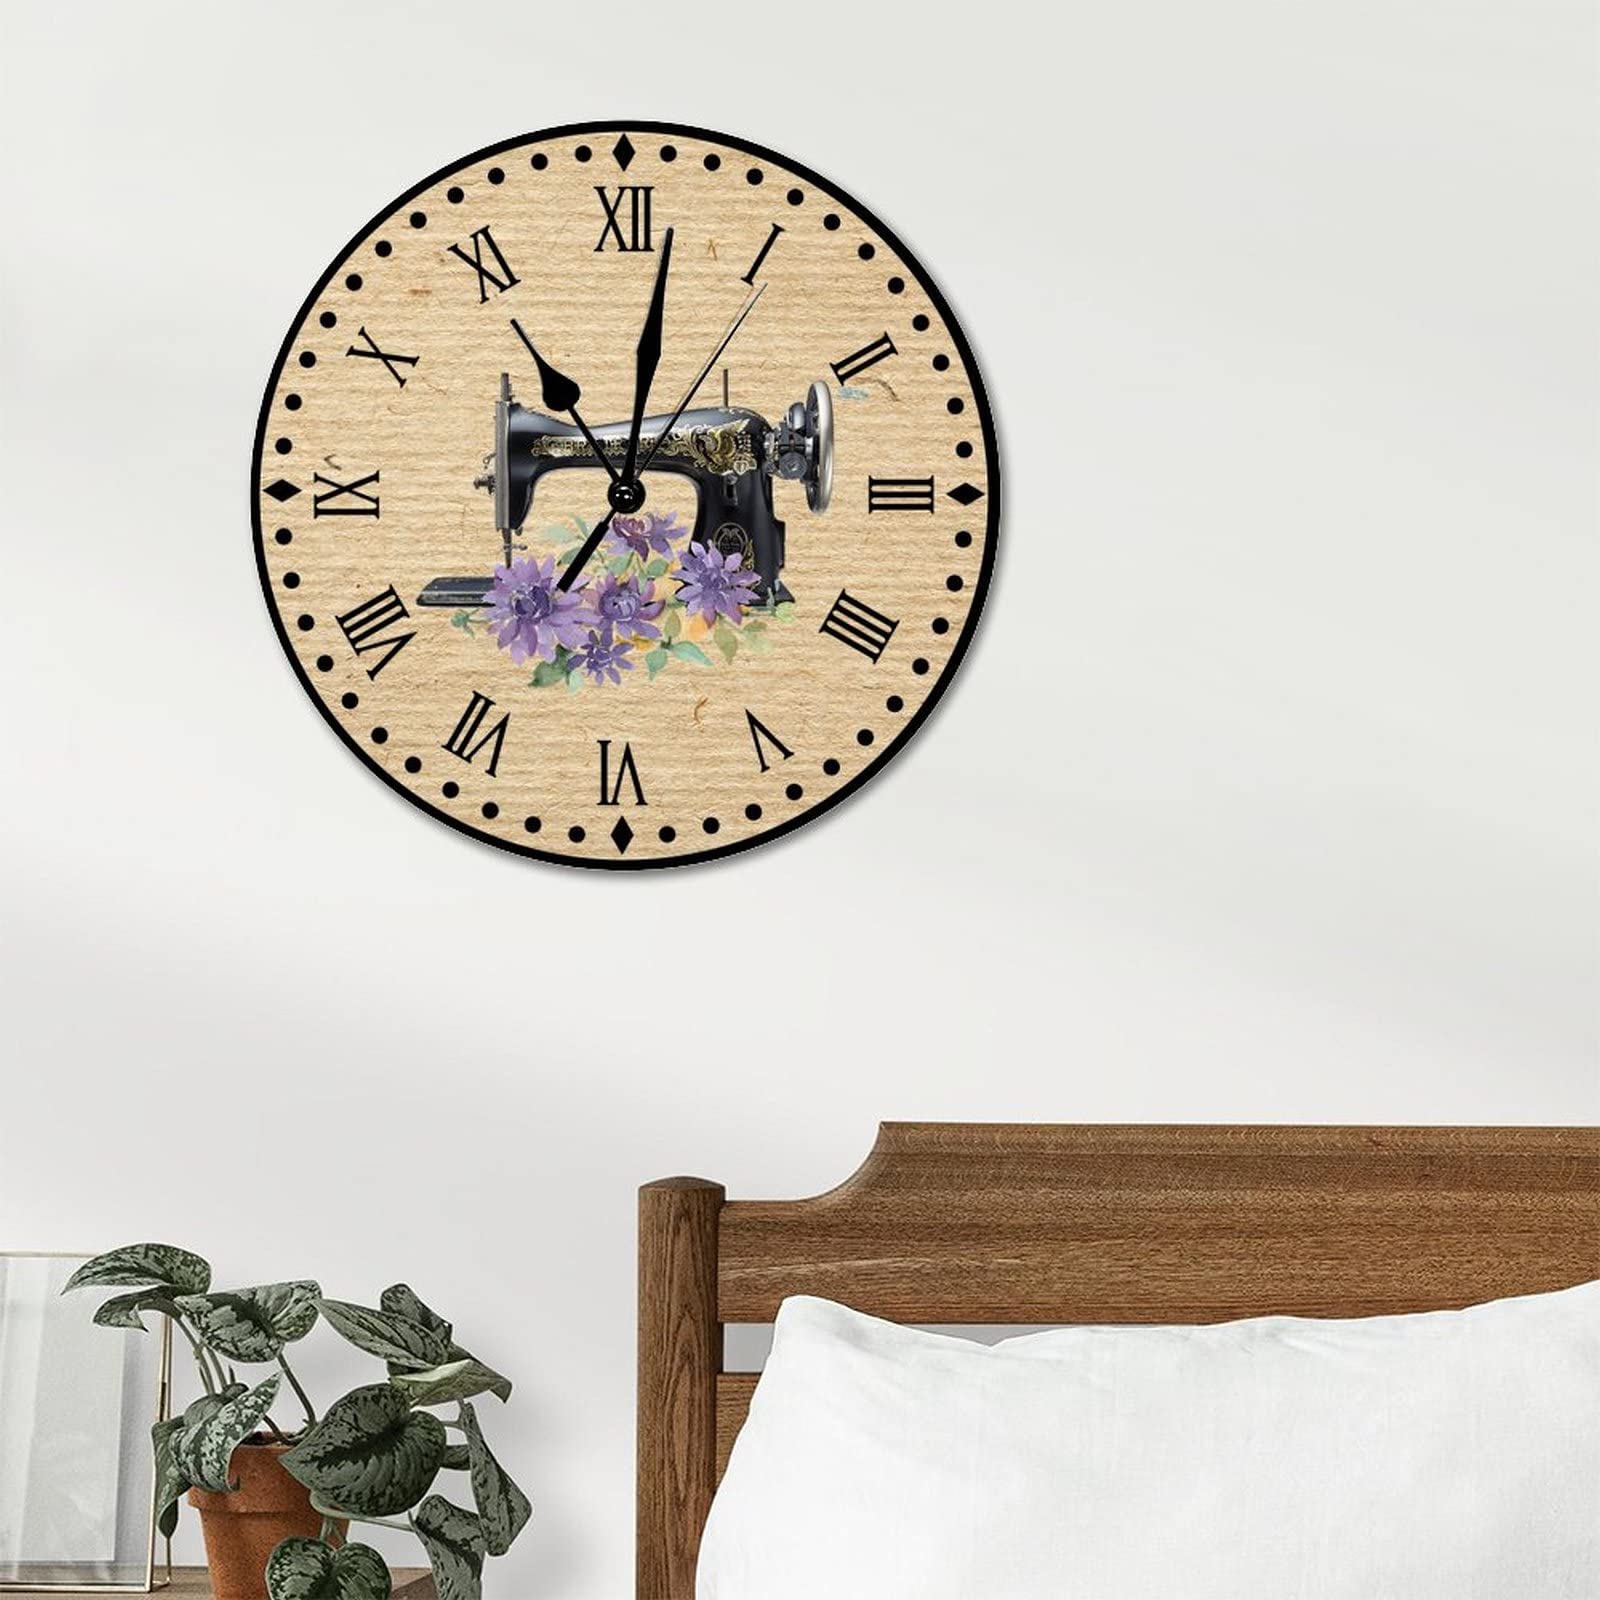 Floral Sewing Machine Wood Wall Clocks Sewing Lovers Hanging Wall Clock 10inch Abstract Silent Non-Ticking Battery Operated Wood Print Hanging Clock for Living Room Office Home Craft Room Decor